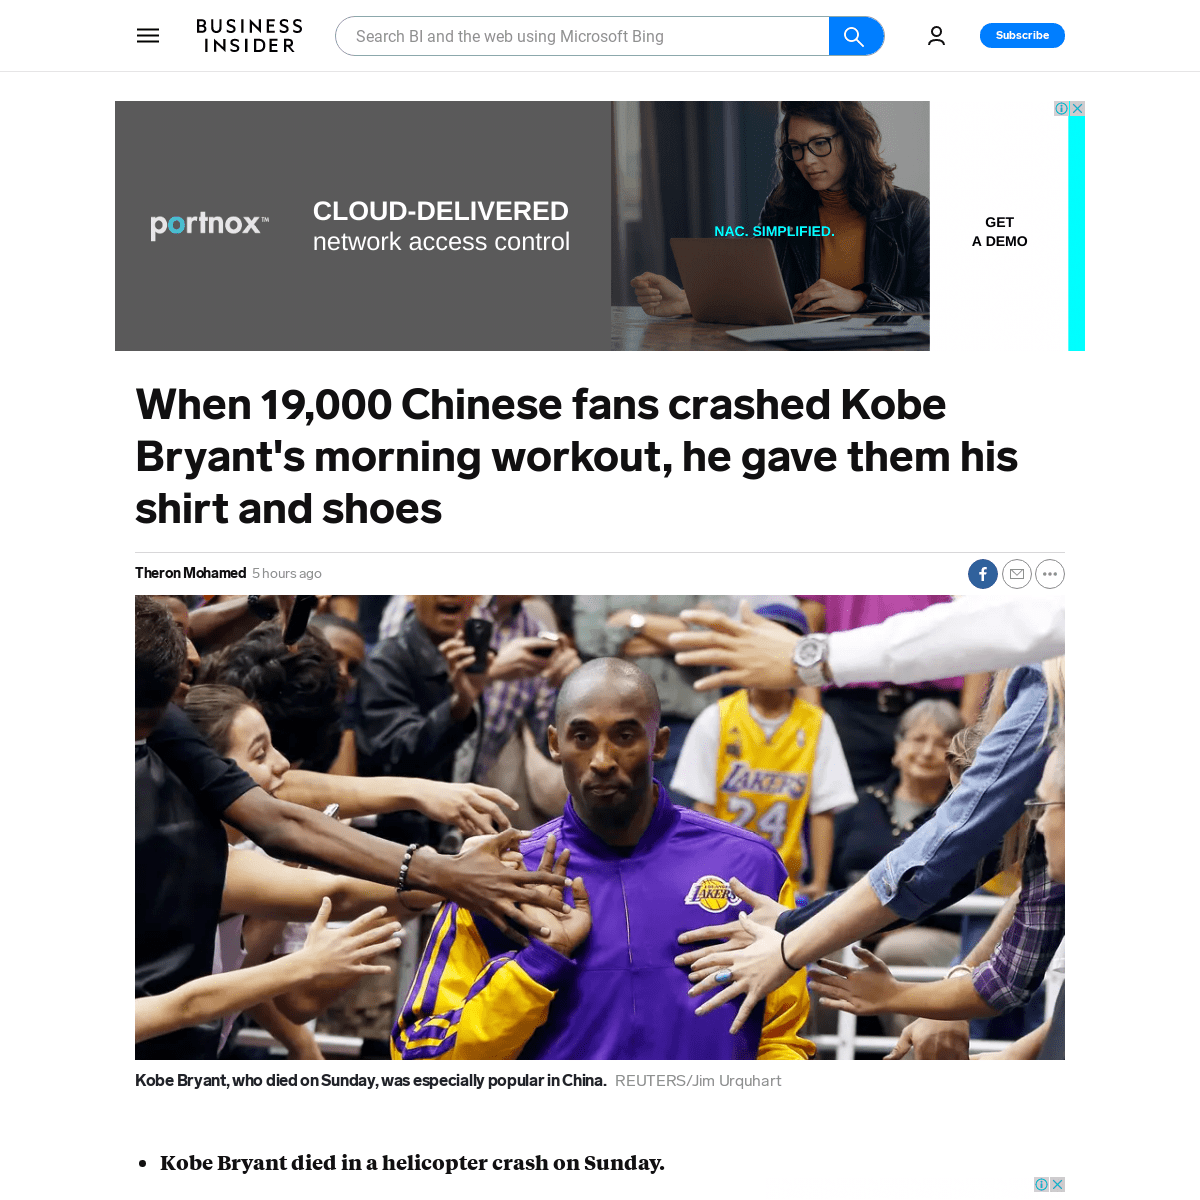 A complete backup of www.businessinsider.com/kobe-bryant-gave-away-shirt-shoes-19000-chinese-fans-nike-2020-1